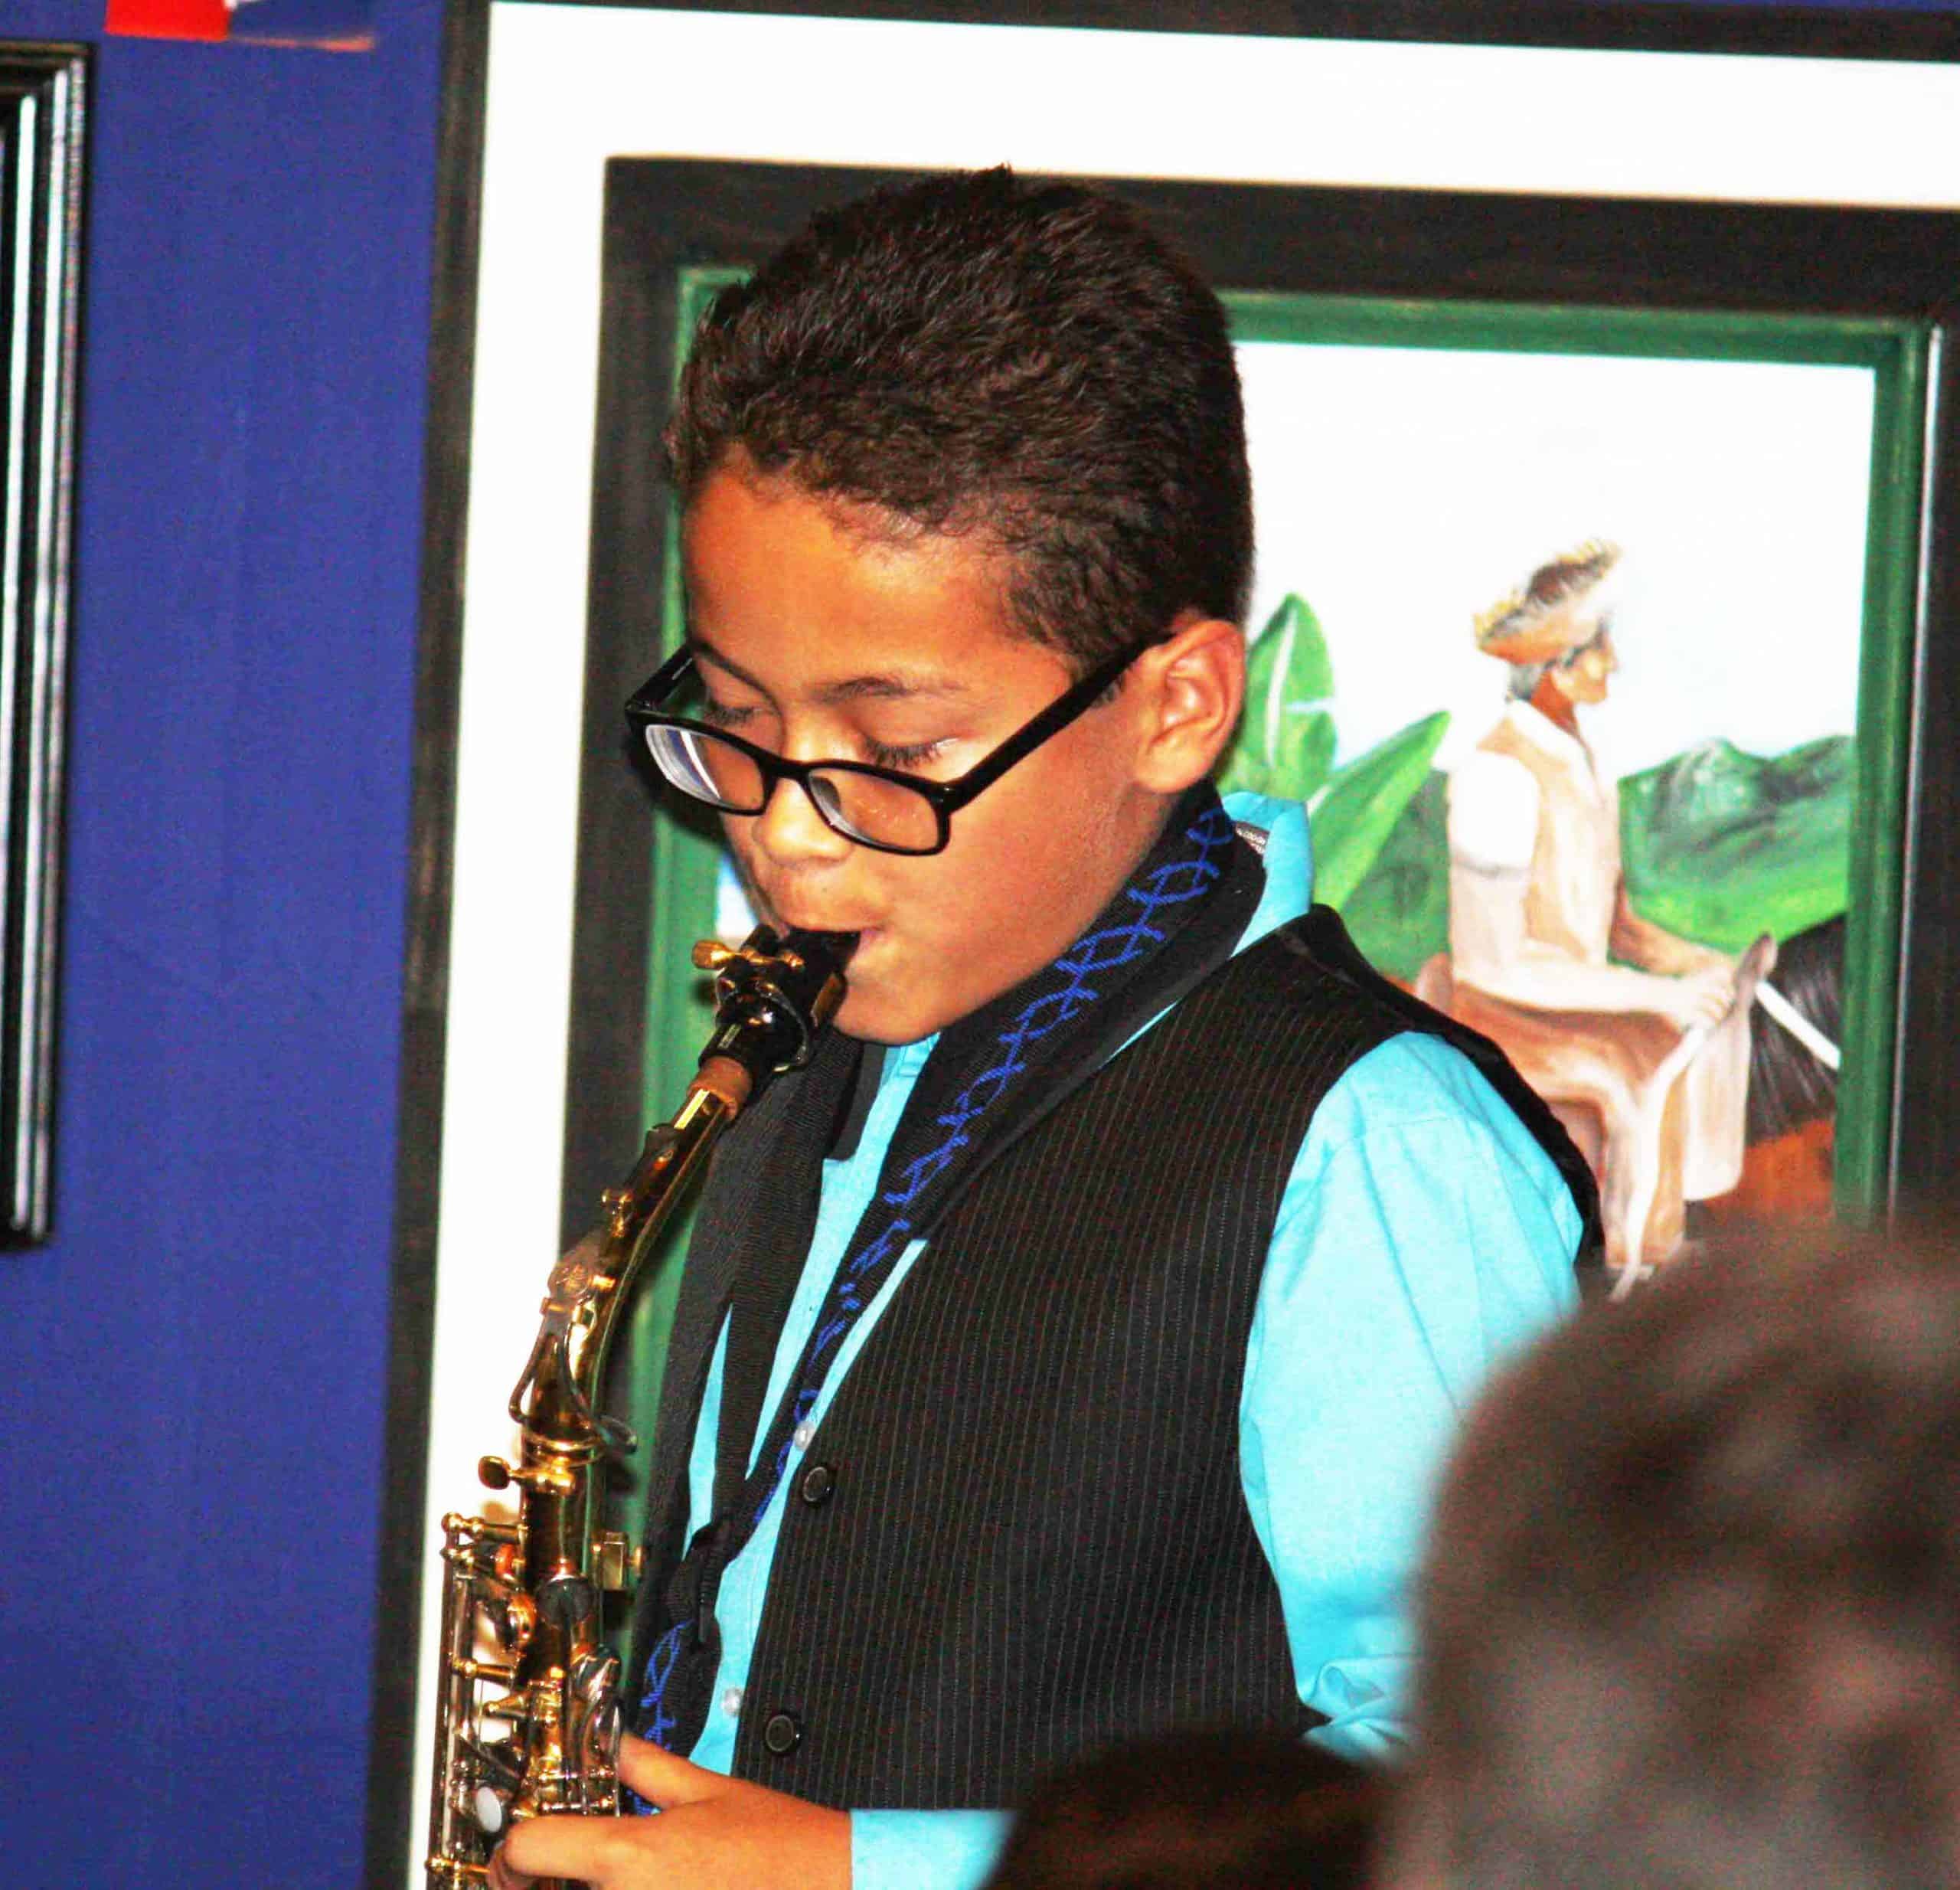 Young boy learning how to play the saxophone.